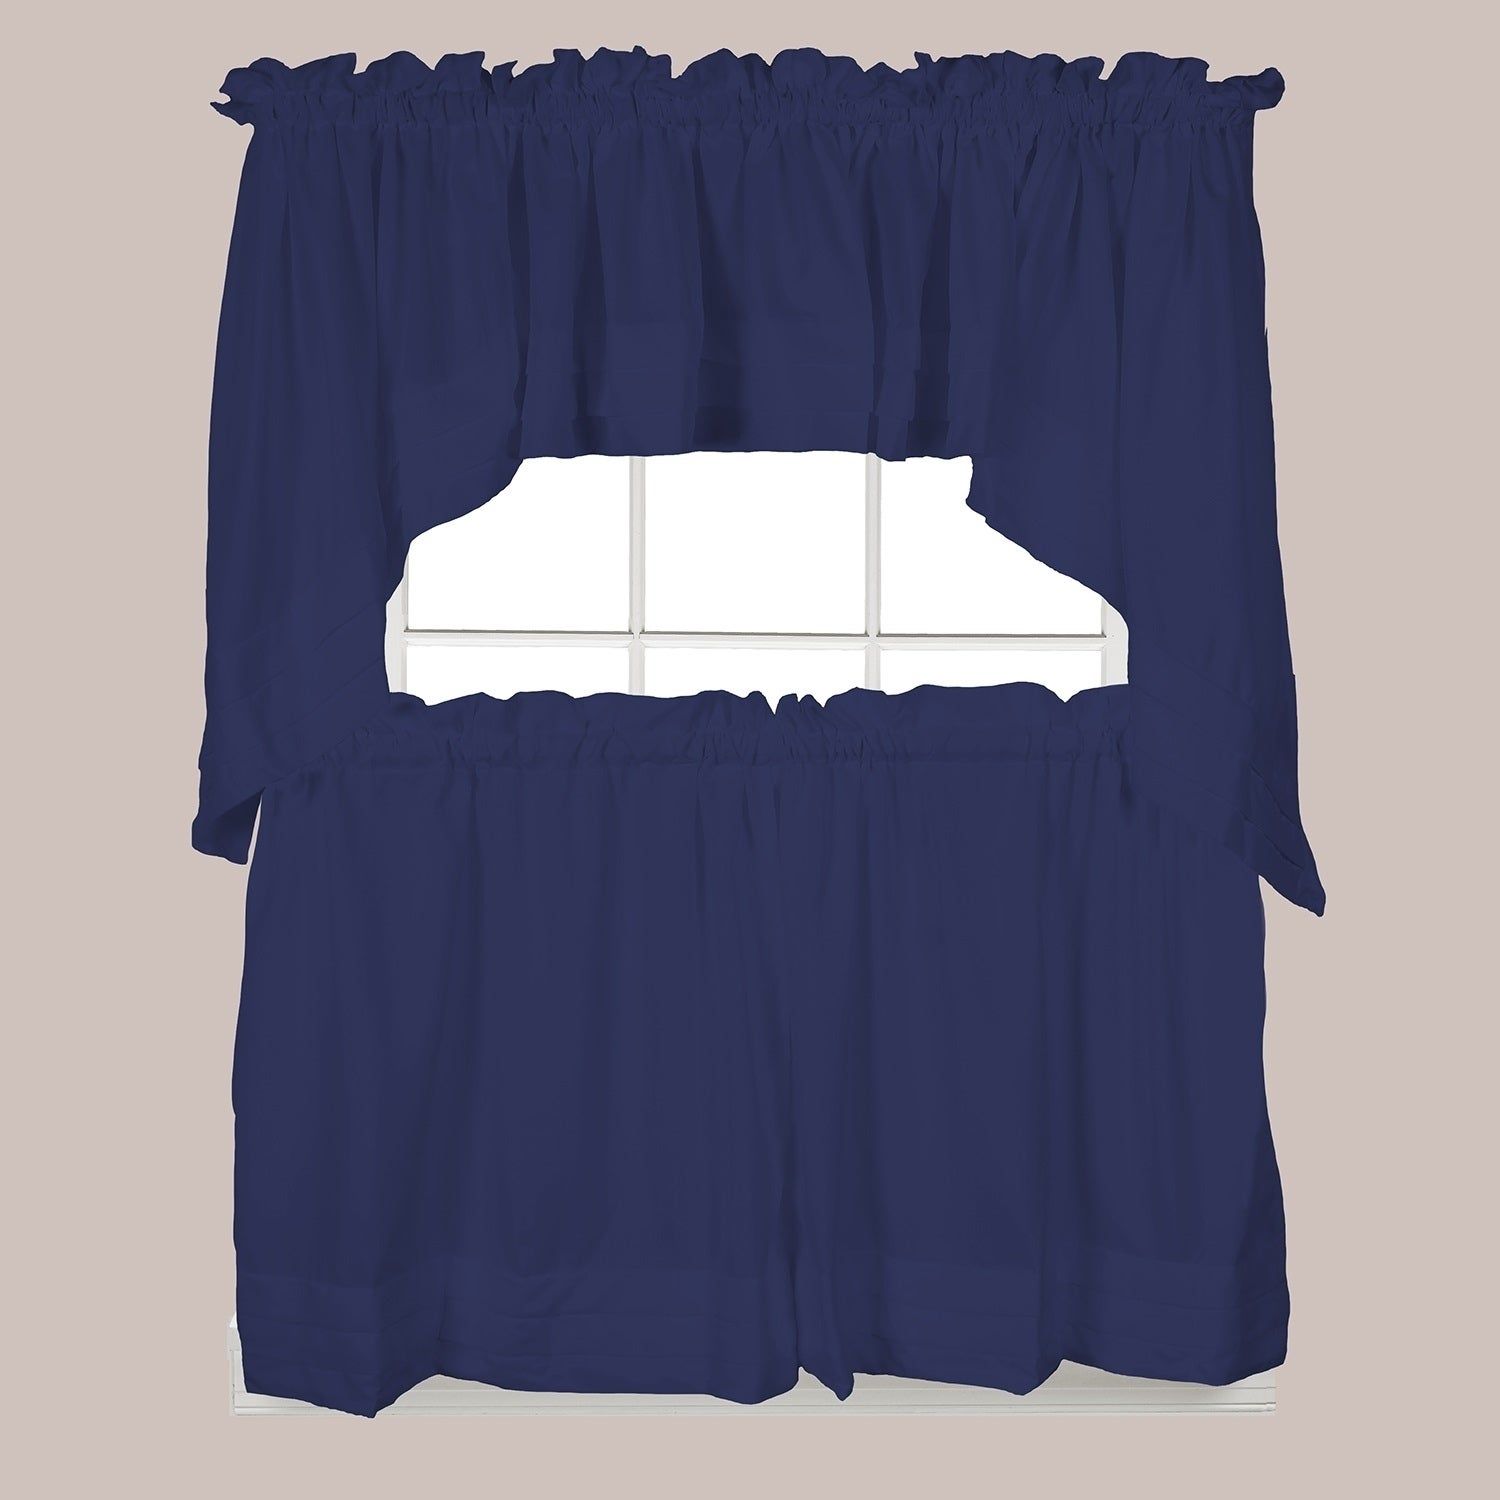 The Gray Barn Flinders Forge 45 Inch Tier Pair In Navy Within Flinders Forge 24 Inch Tier Pairs In Navy (View 2 of 20)